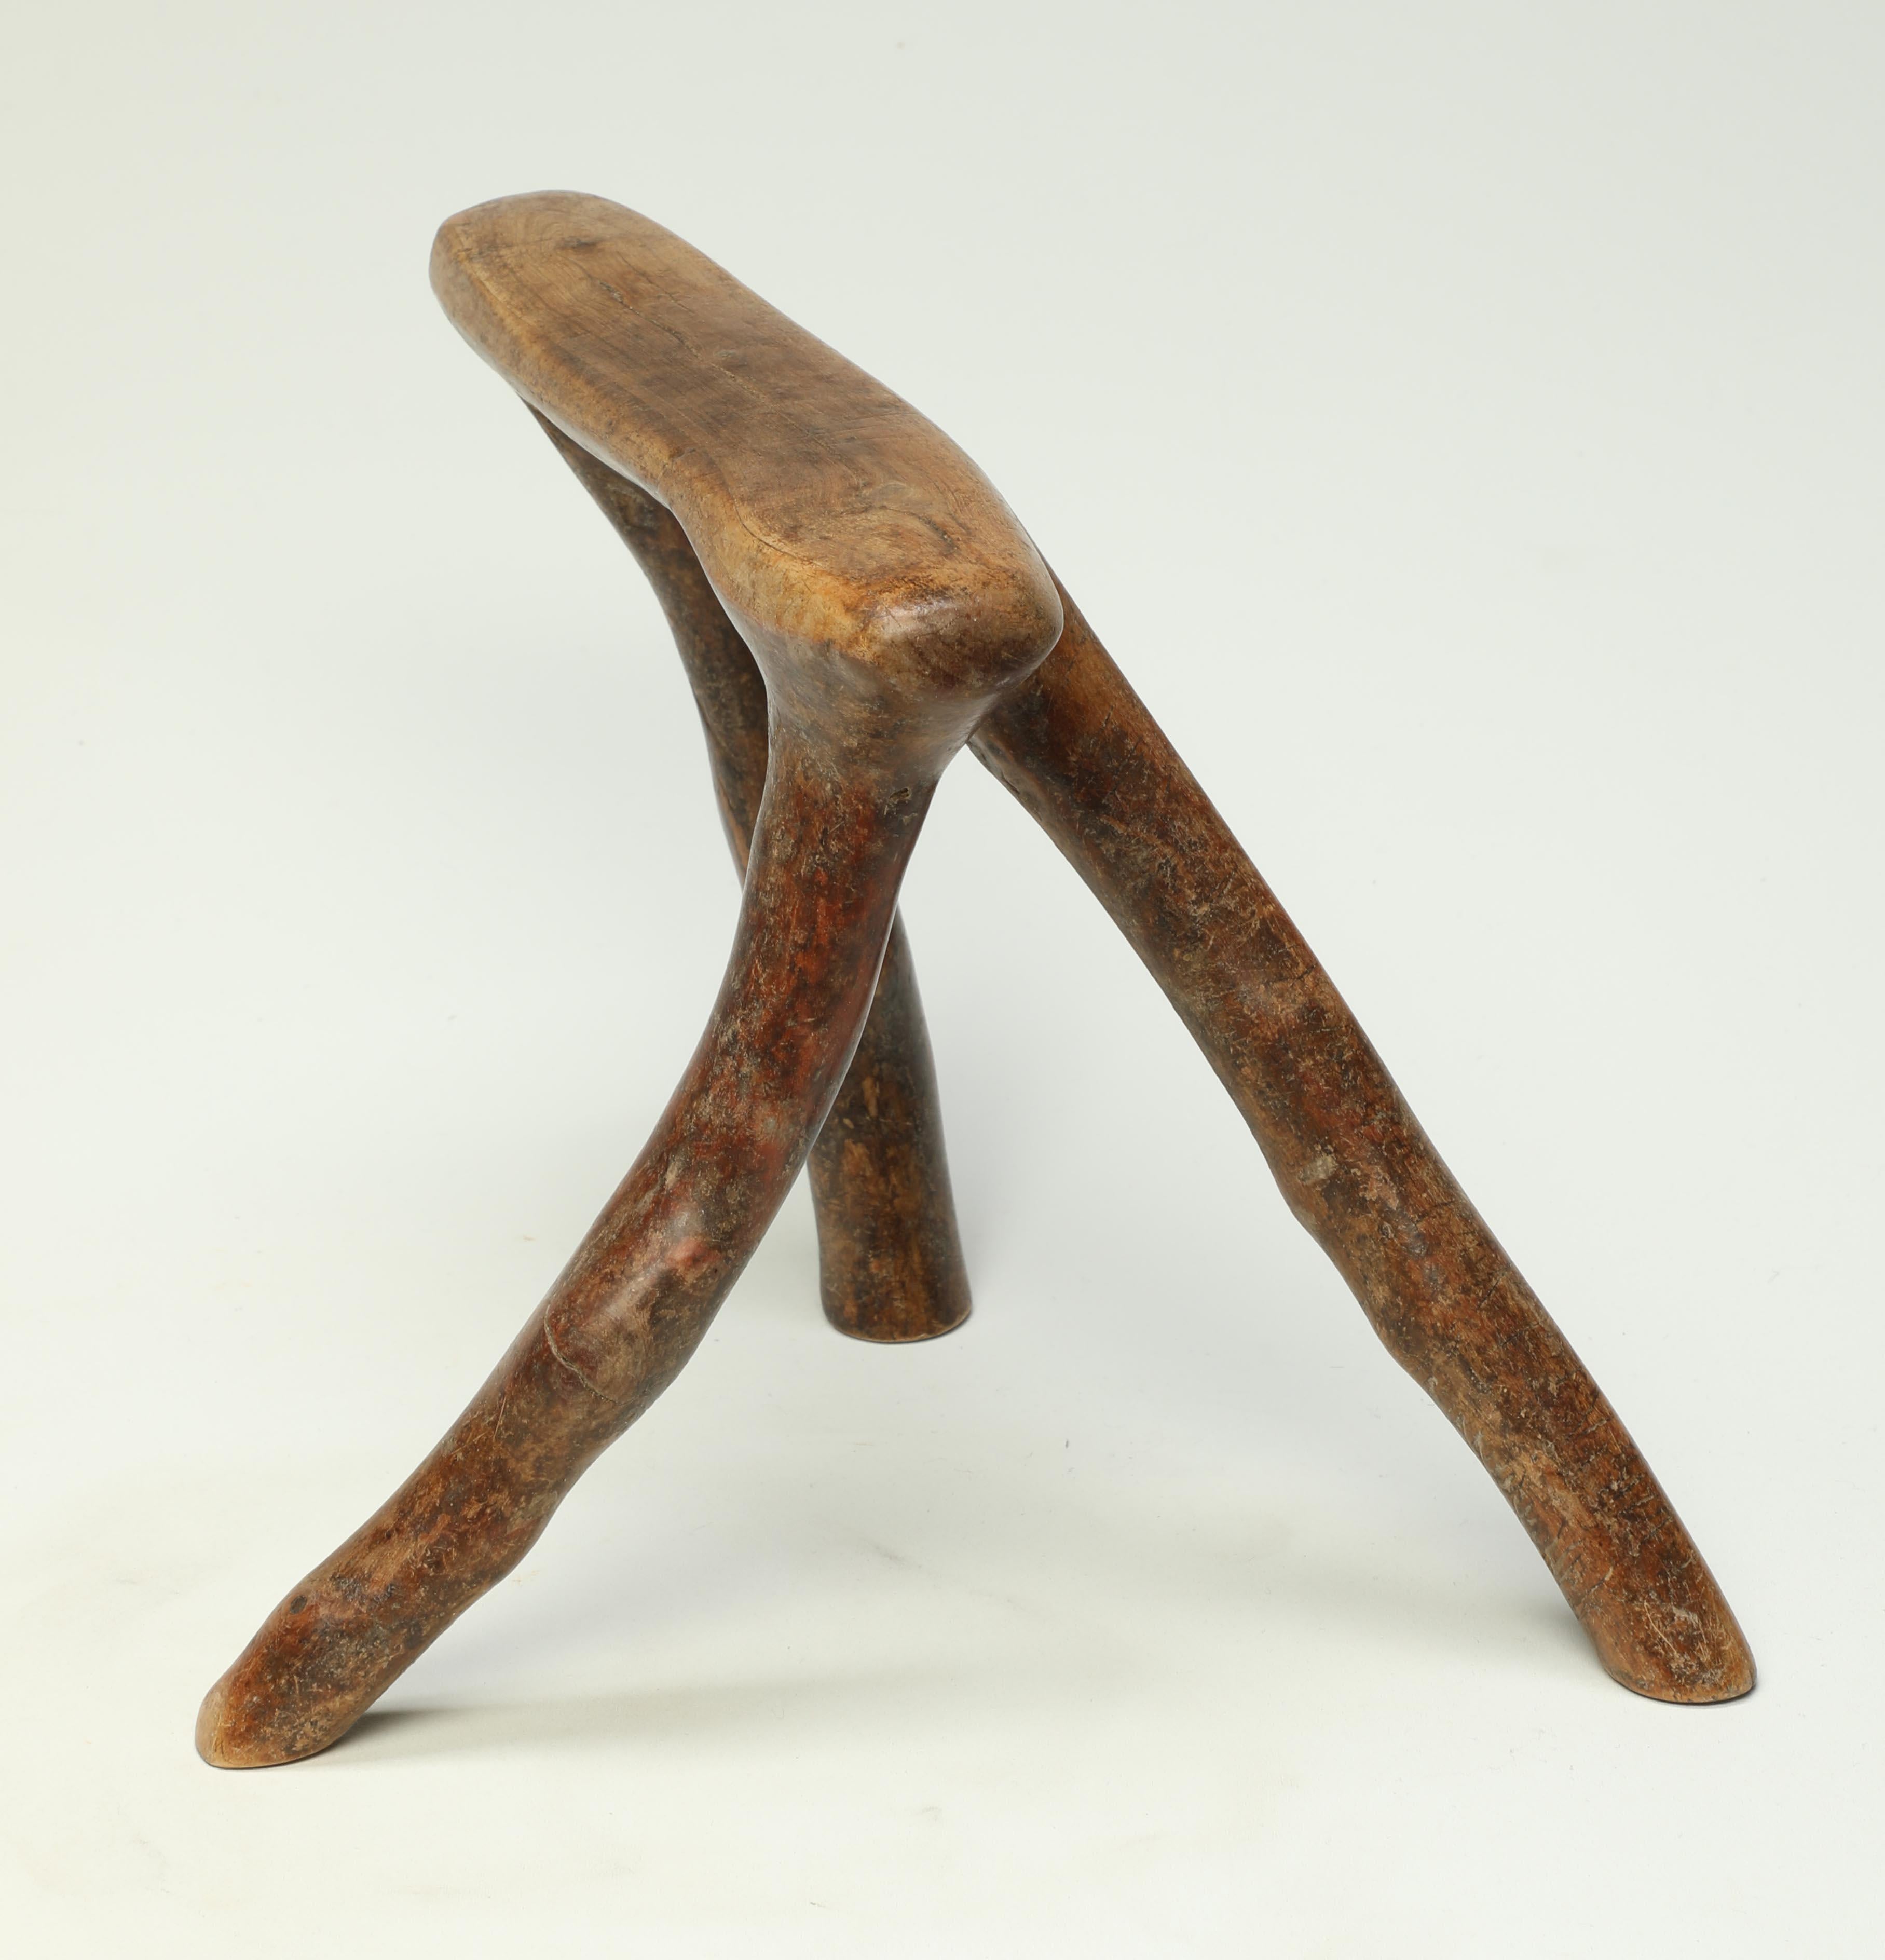 Kenya Tribal Wood Headrest, Stylized Natural Animal Form, African Old and Worn In Distressed Condition For Sale In Point Richmond, CA